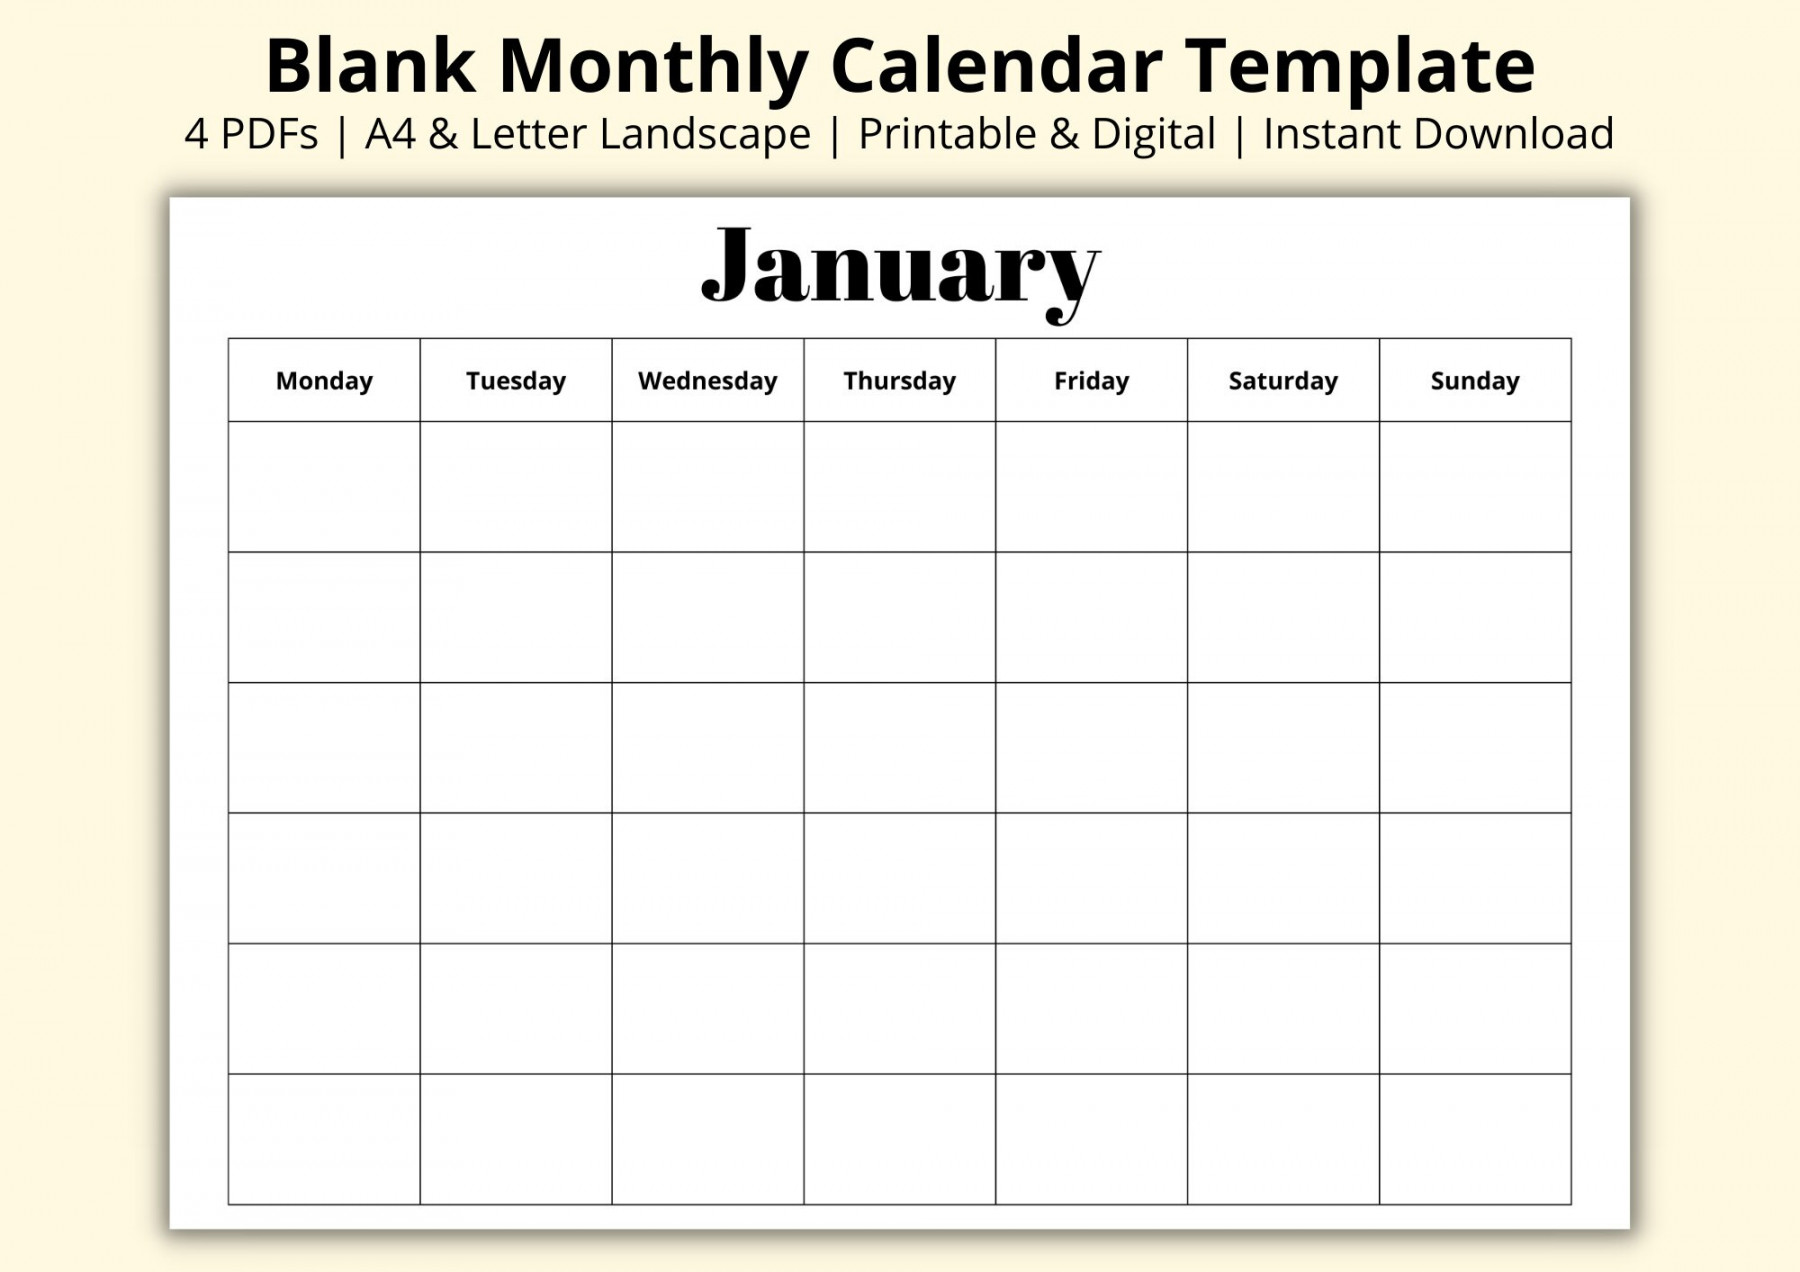 Blank Monthly Calendar Template Undated Calendar Pages - Etsy